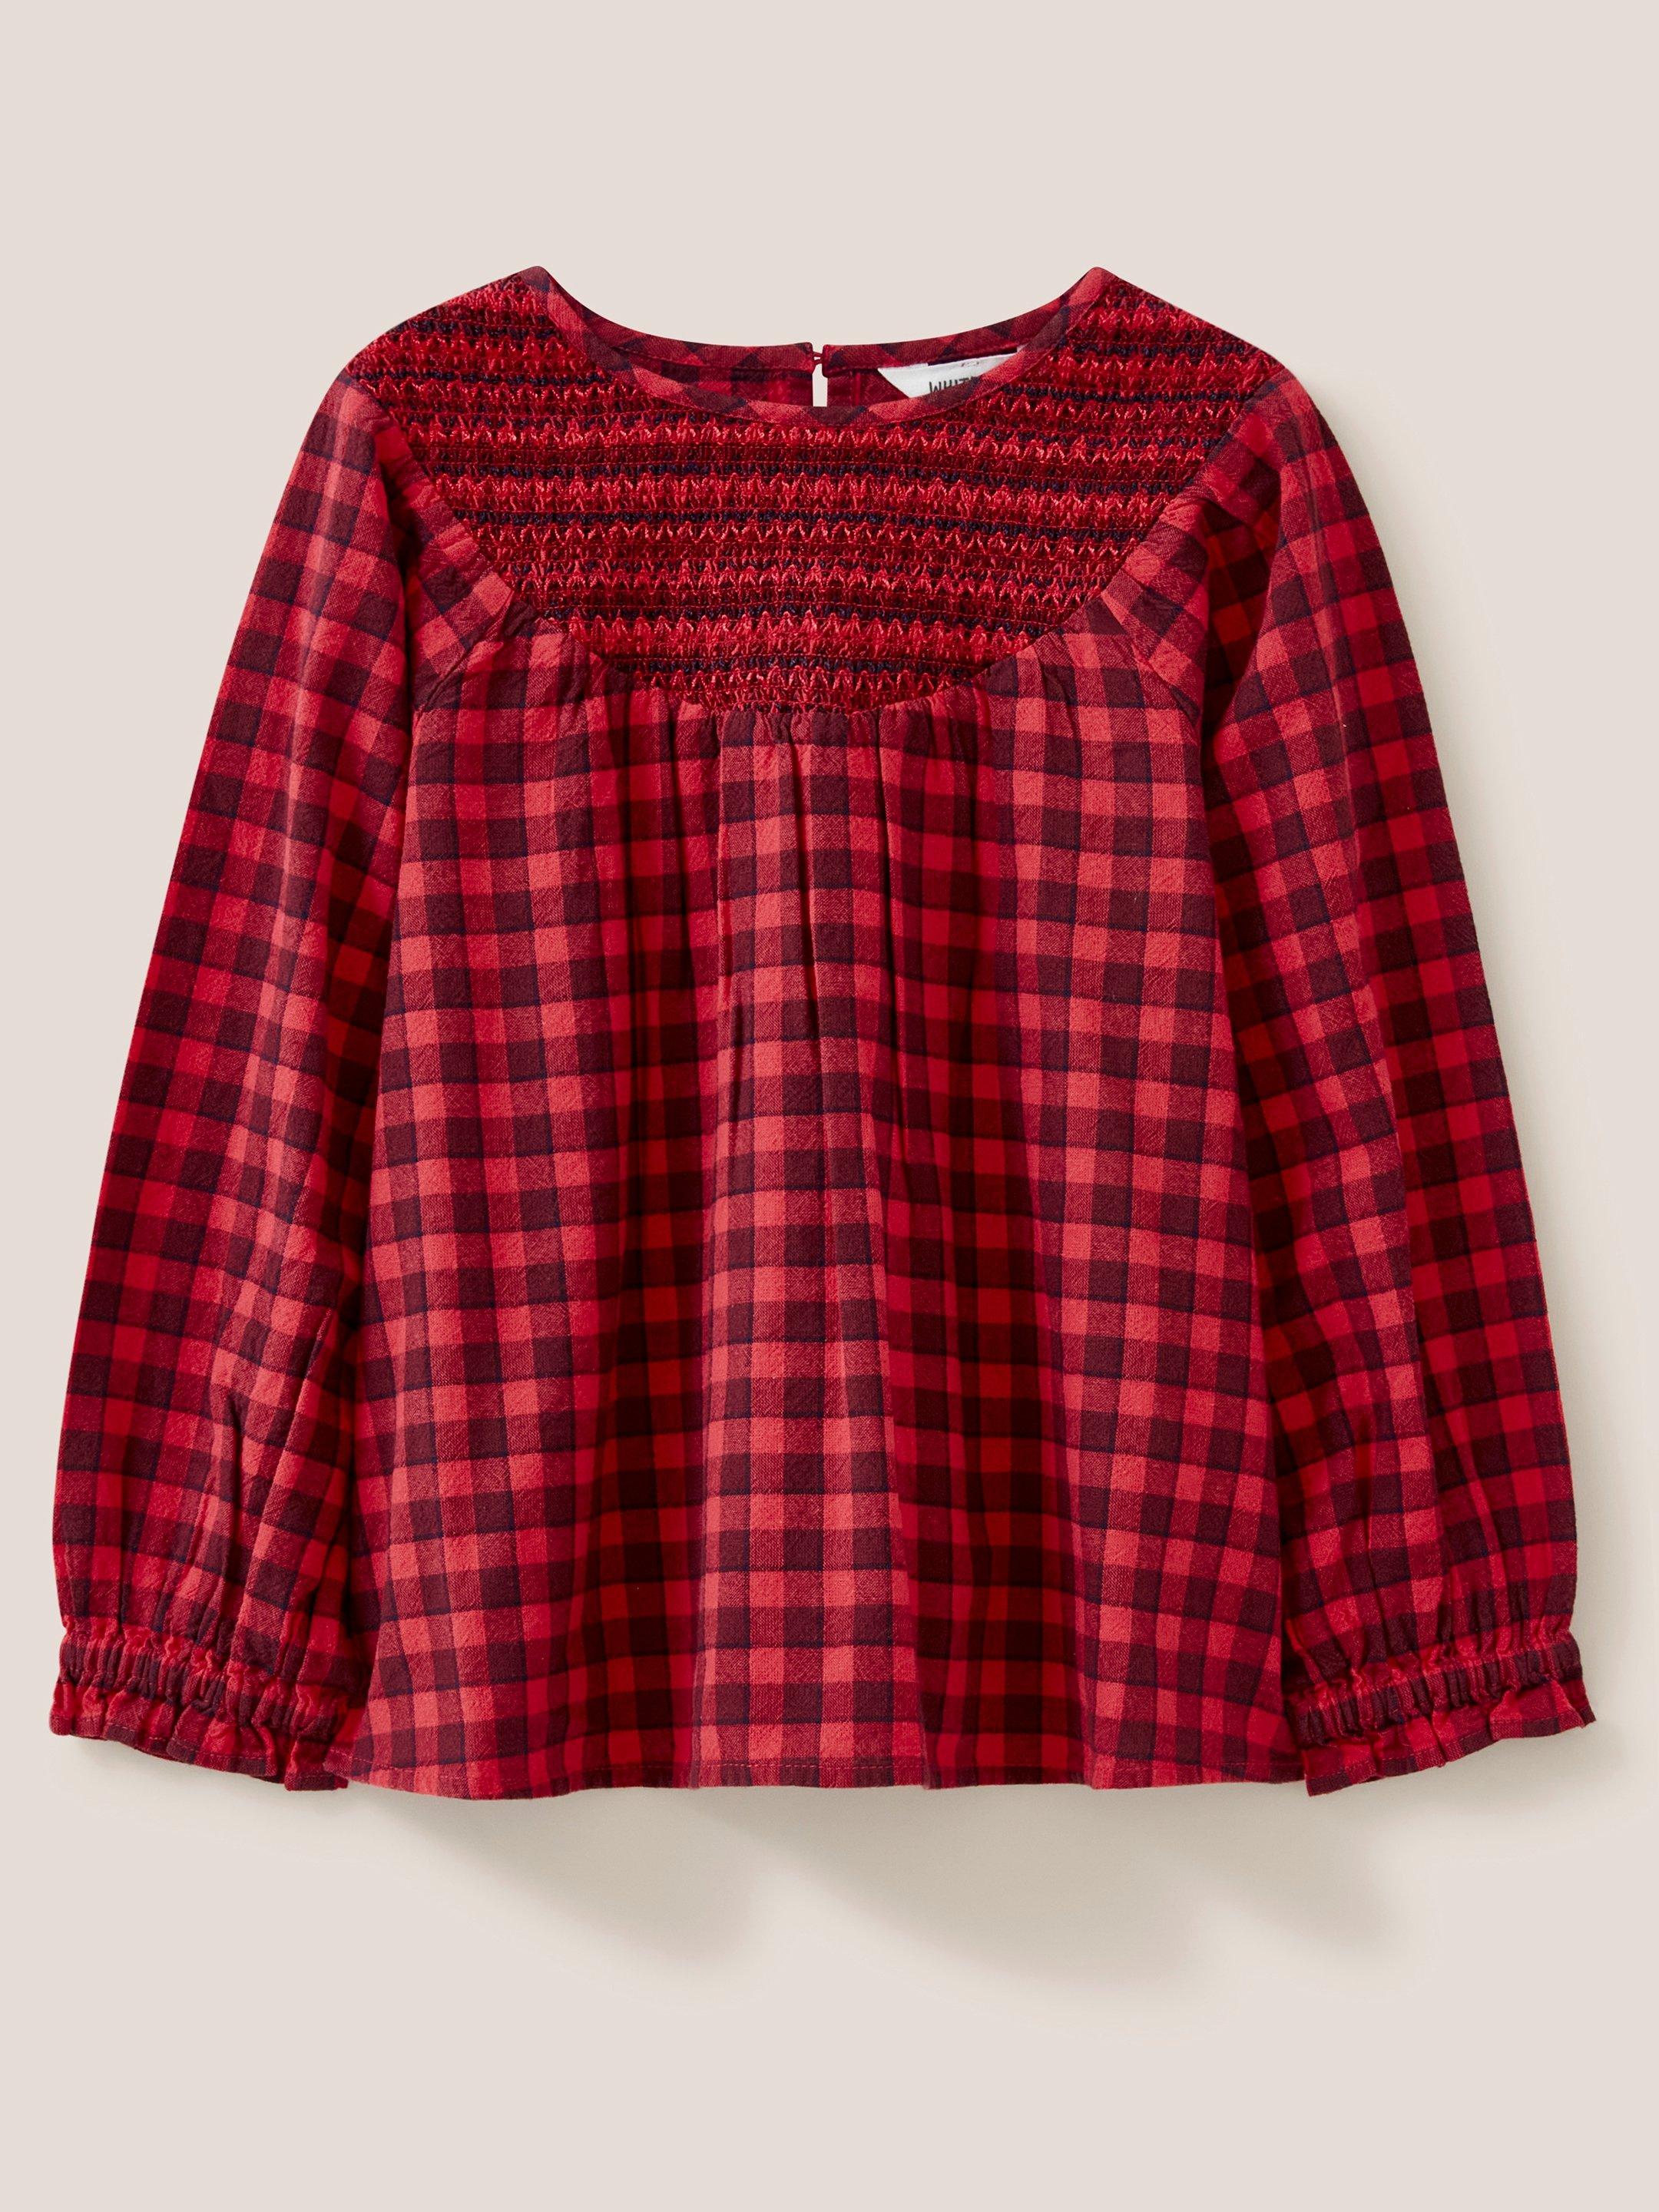 Adeline Check Top in RED MLT - FLAT FRONT